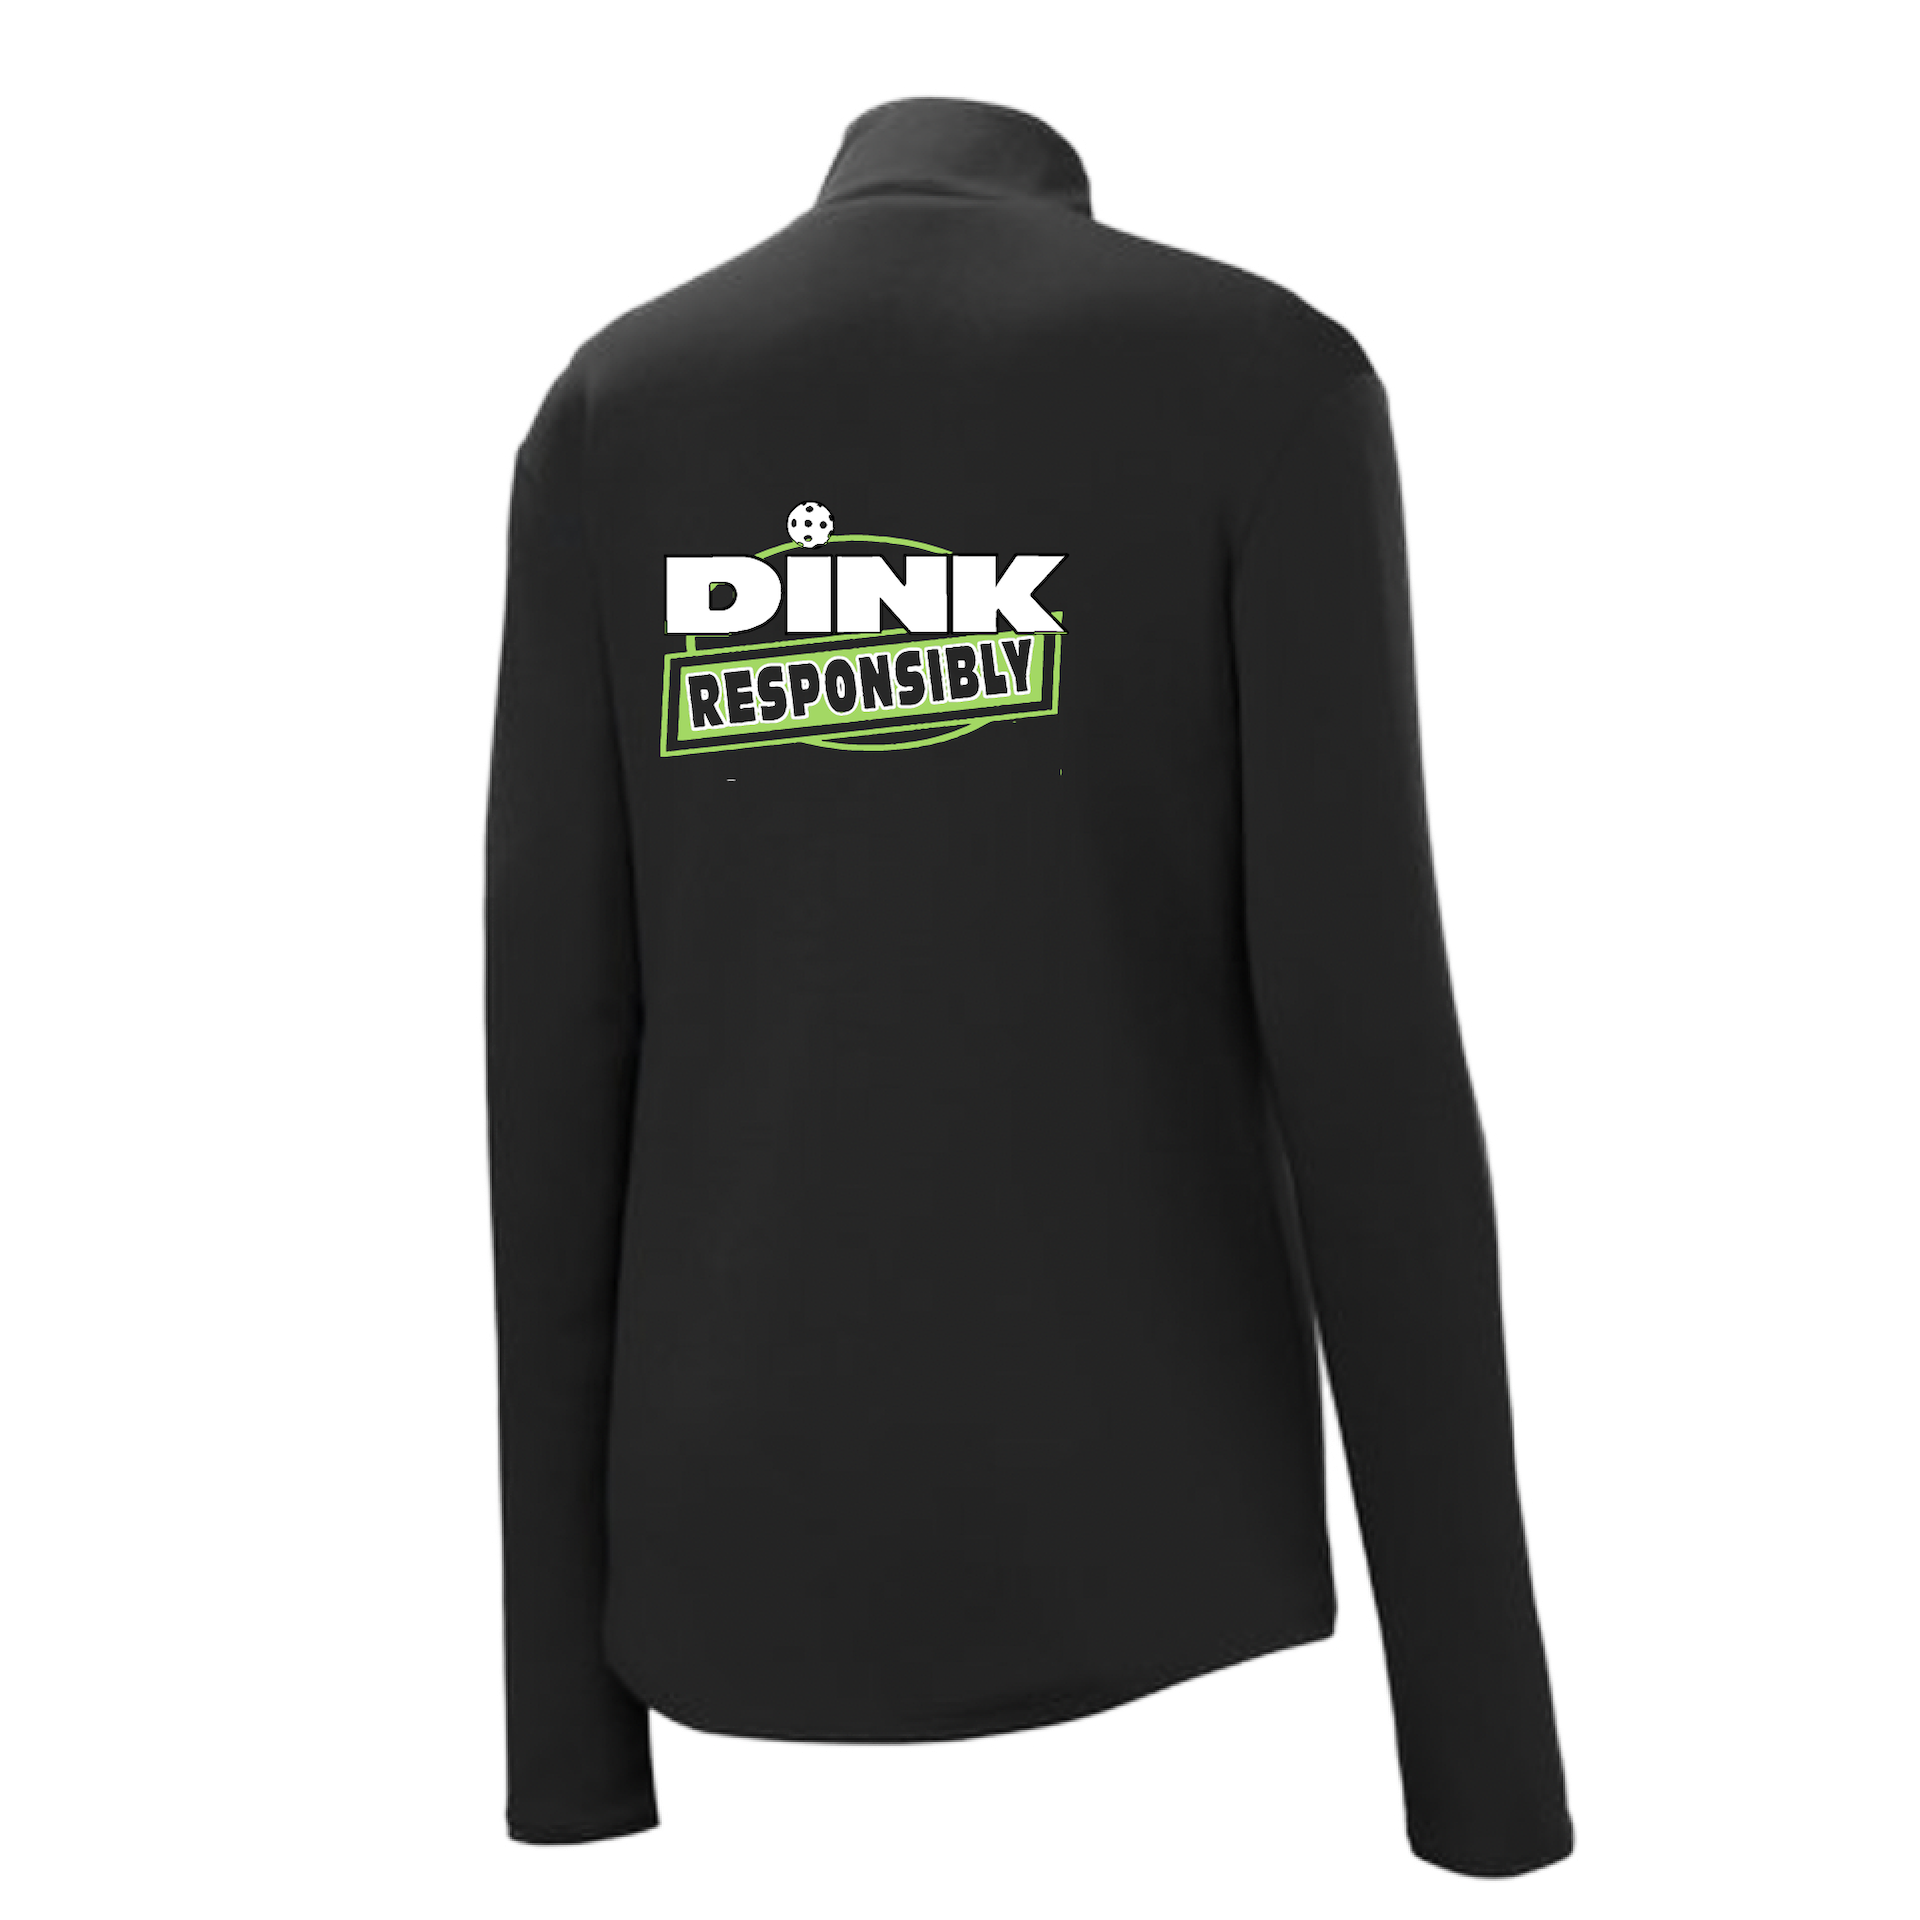 Pickleball Design: Dink Responsibly - Don't Get Smashed  Women's 1/4-Zip Pullover: Princess seams and Drop tail hem.  Turn up the volume in this Women's shirt with its perfect mix of softness and attitude. Material is ultra-comfortable with moisture wicking properties and tri-blend softness. PosiCharge technology locks in color. Highly breathable and lightweight. Versatile enough for wearing year-round.